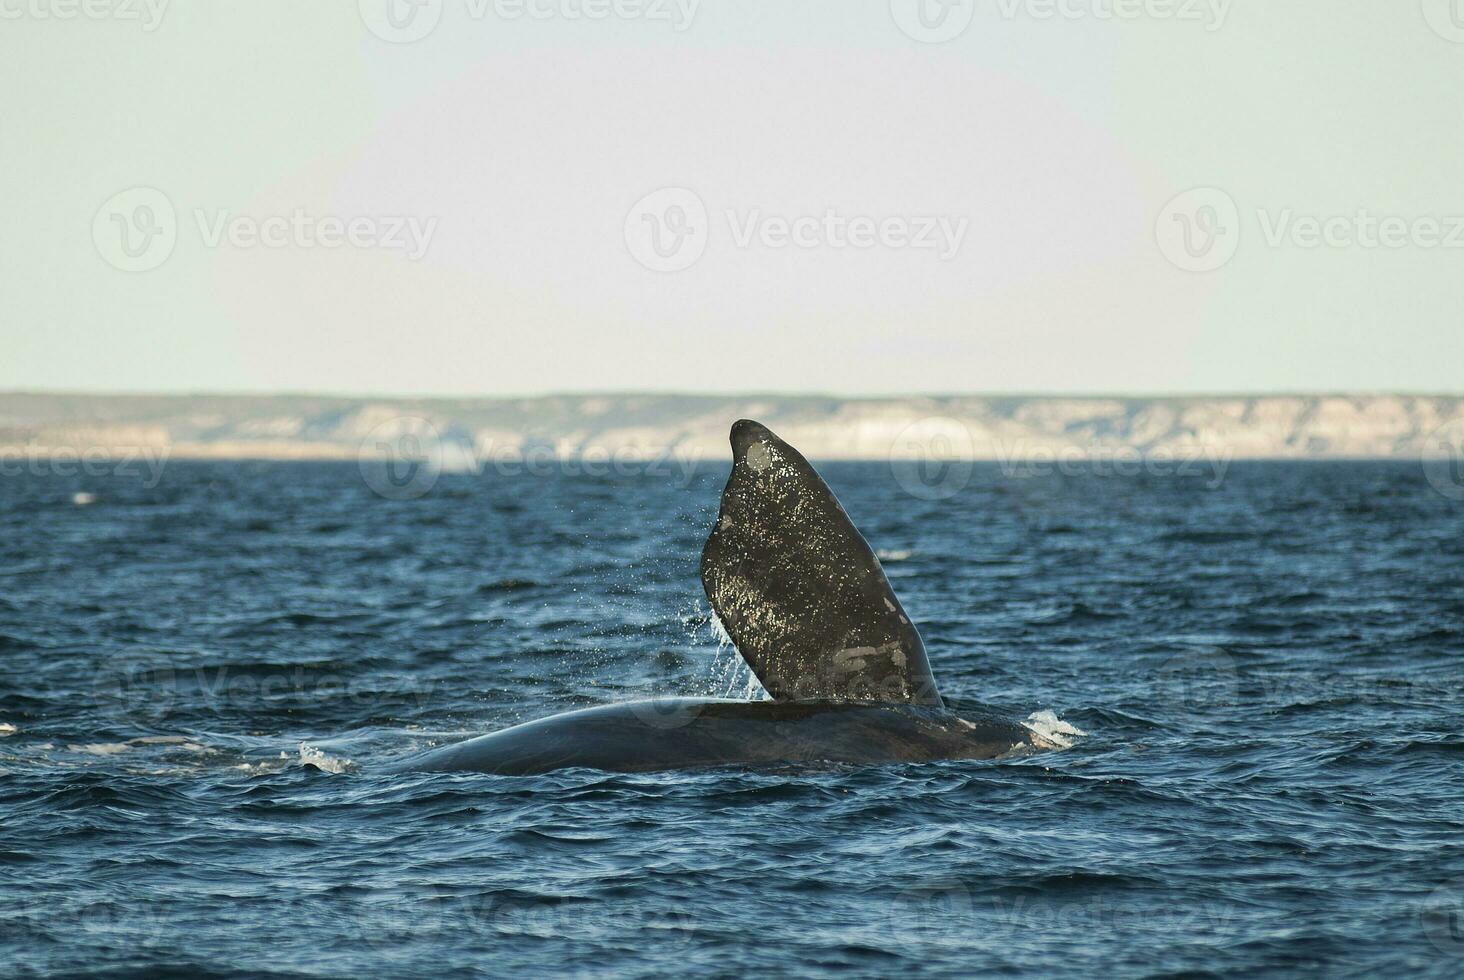 Sohutern right whale tail pectoral fin, endangered species, Patagonia,Argentina photo